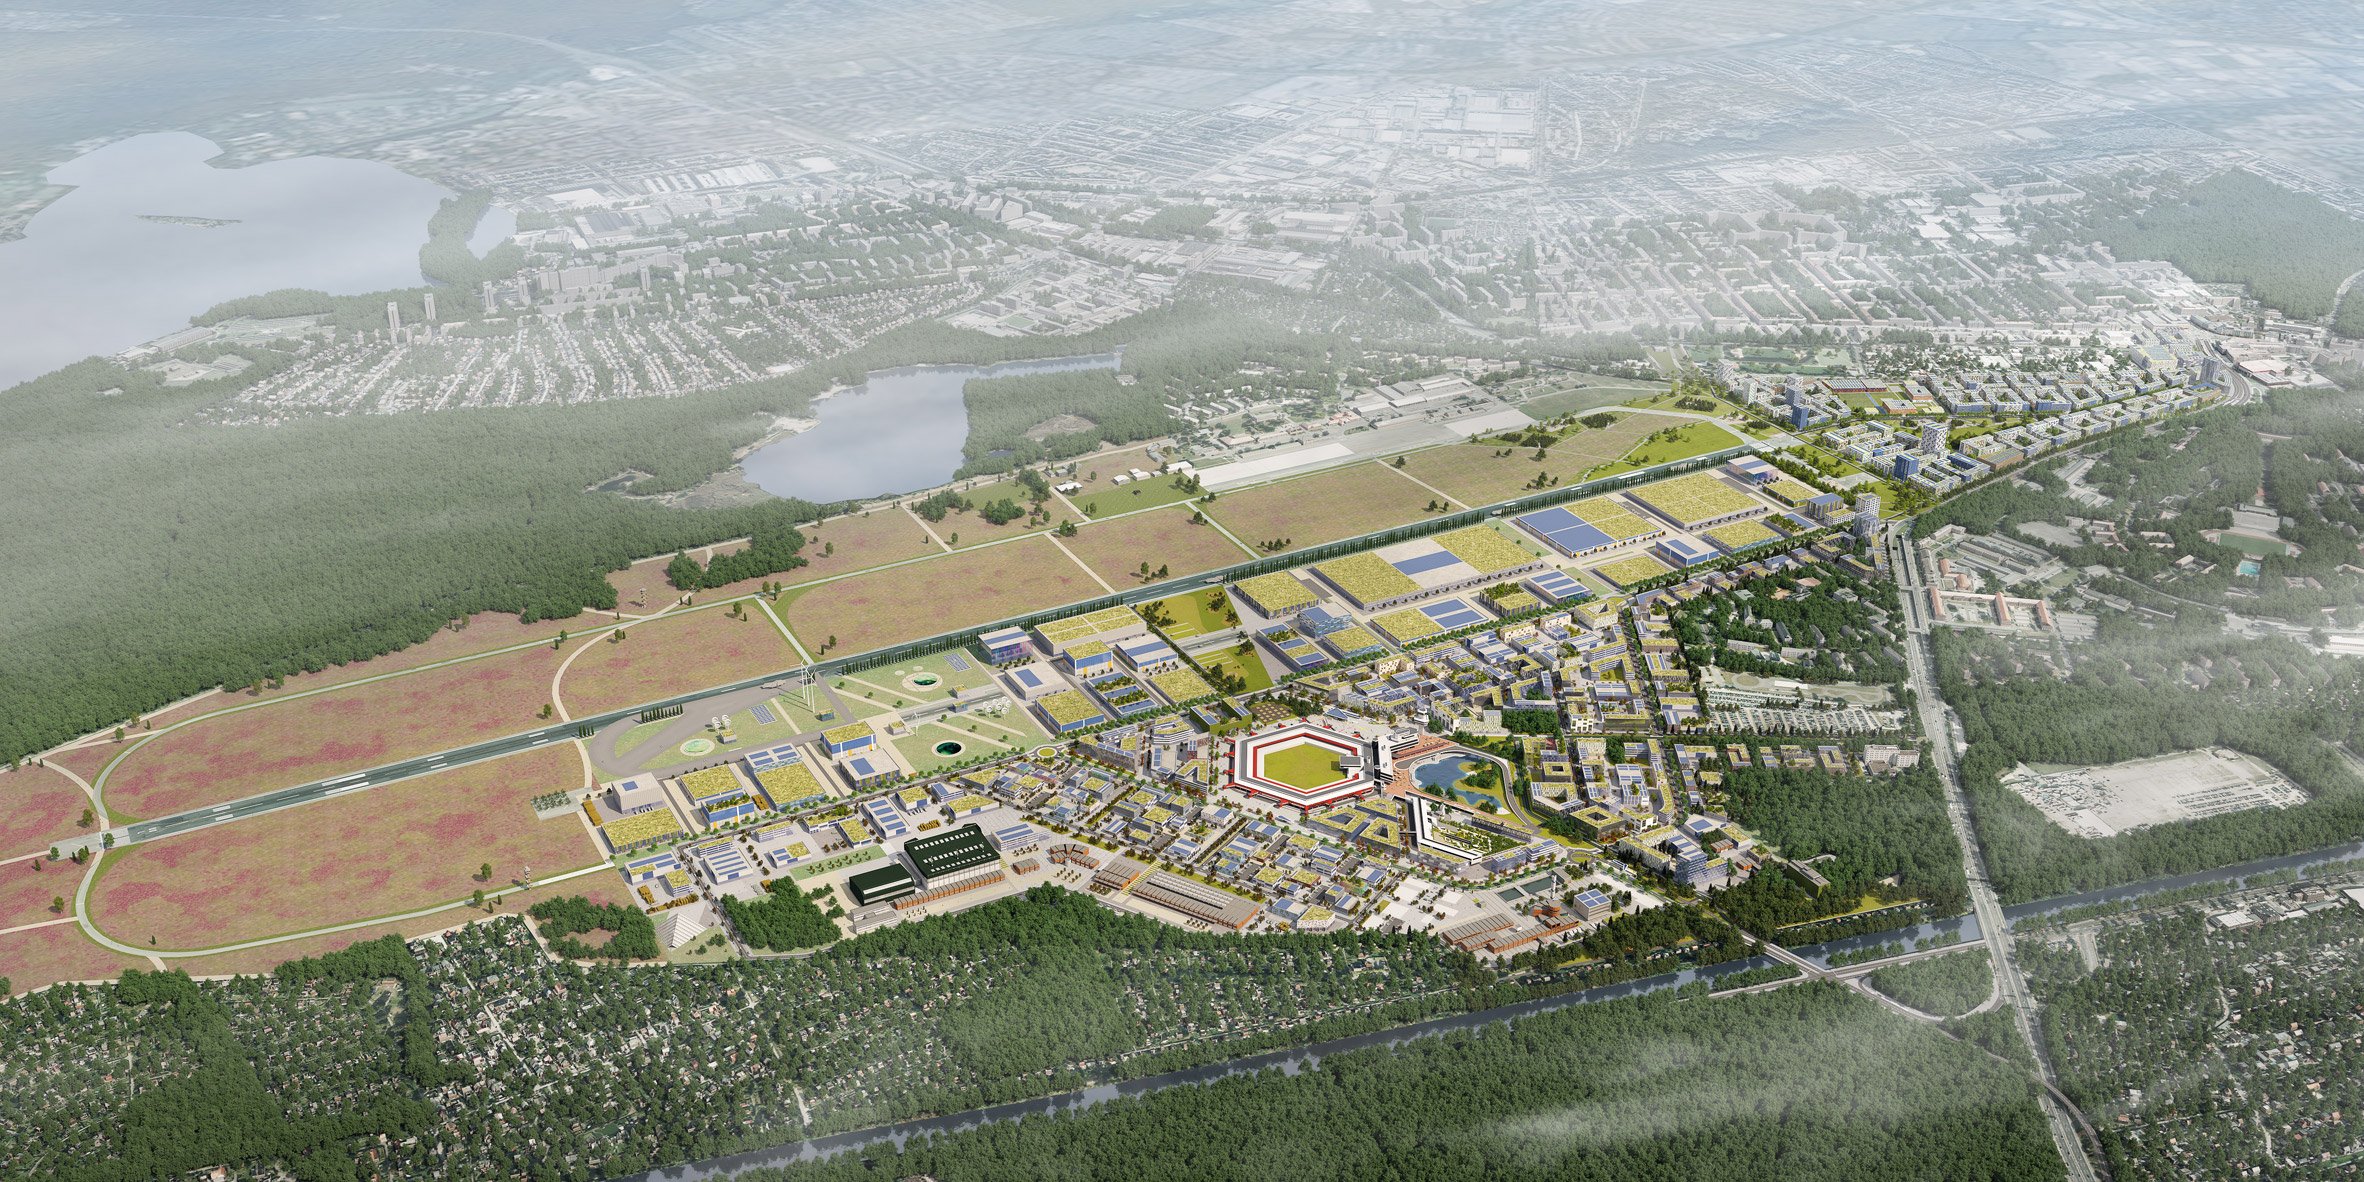 Berlin Set To Build Car-Free Housing on Former Tegel Airport